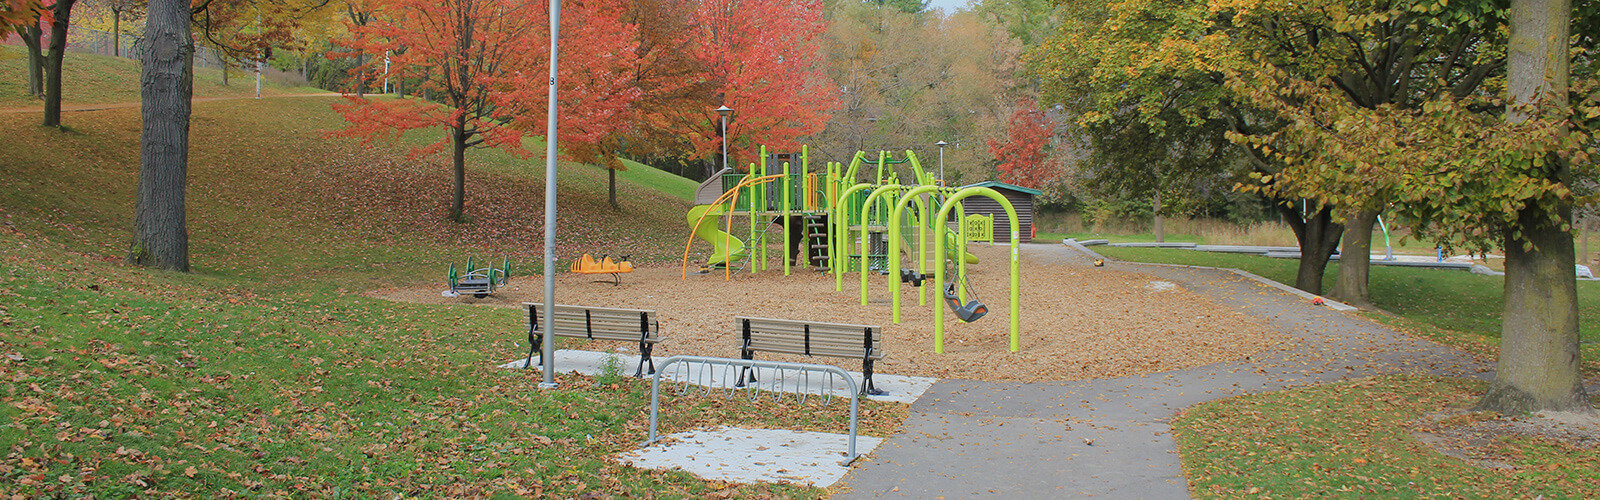 Paved path leading from the foreground to a playground. Fall trees surround the park, along with a couple of park benches and a bike rack.